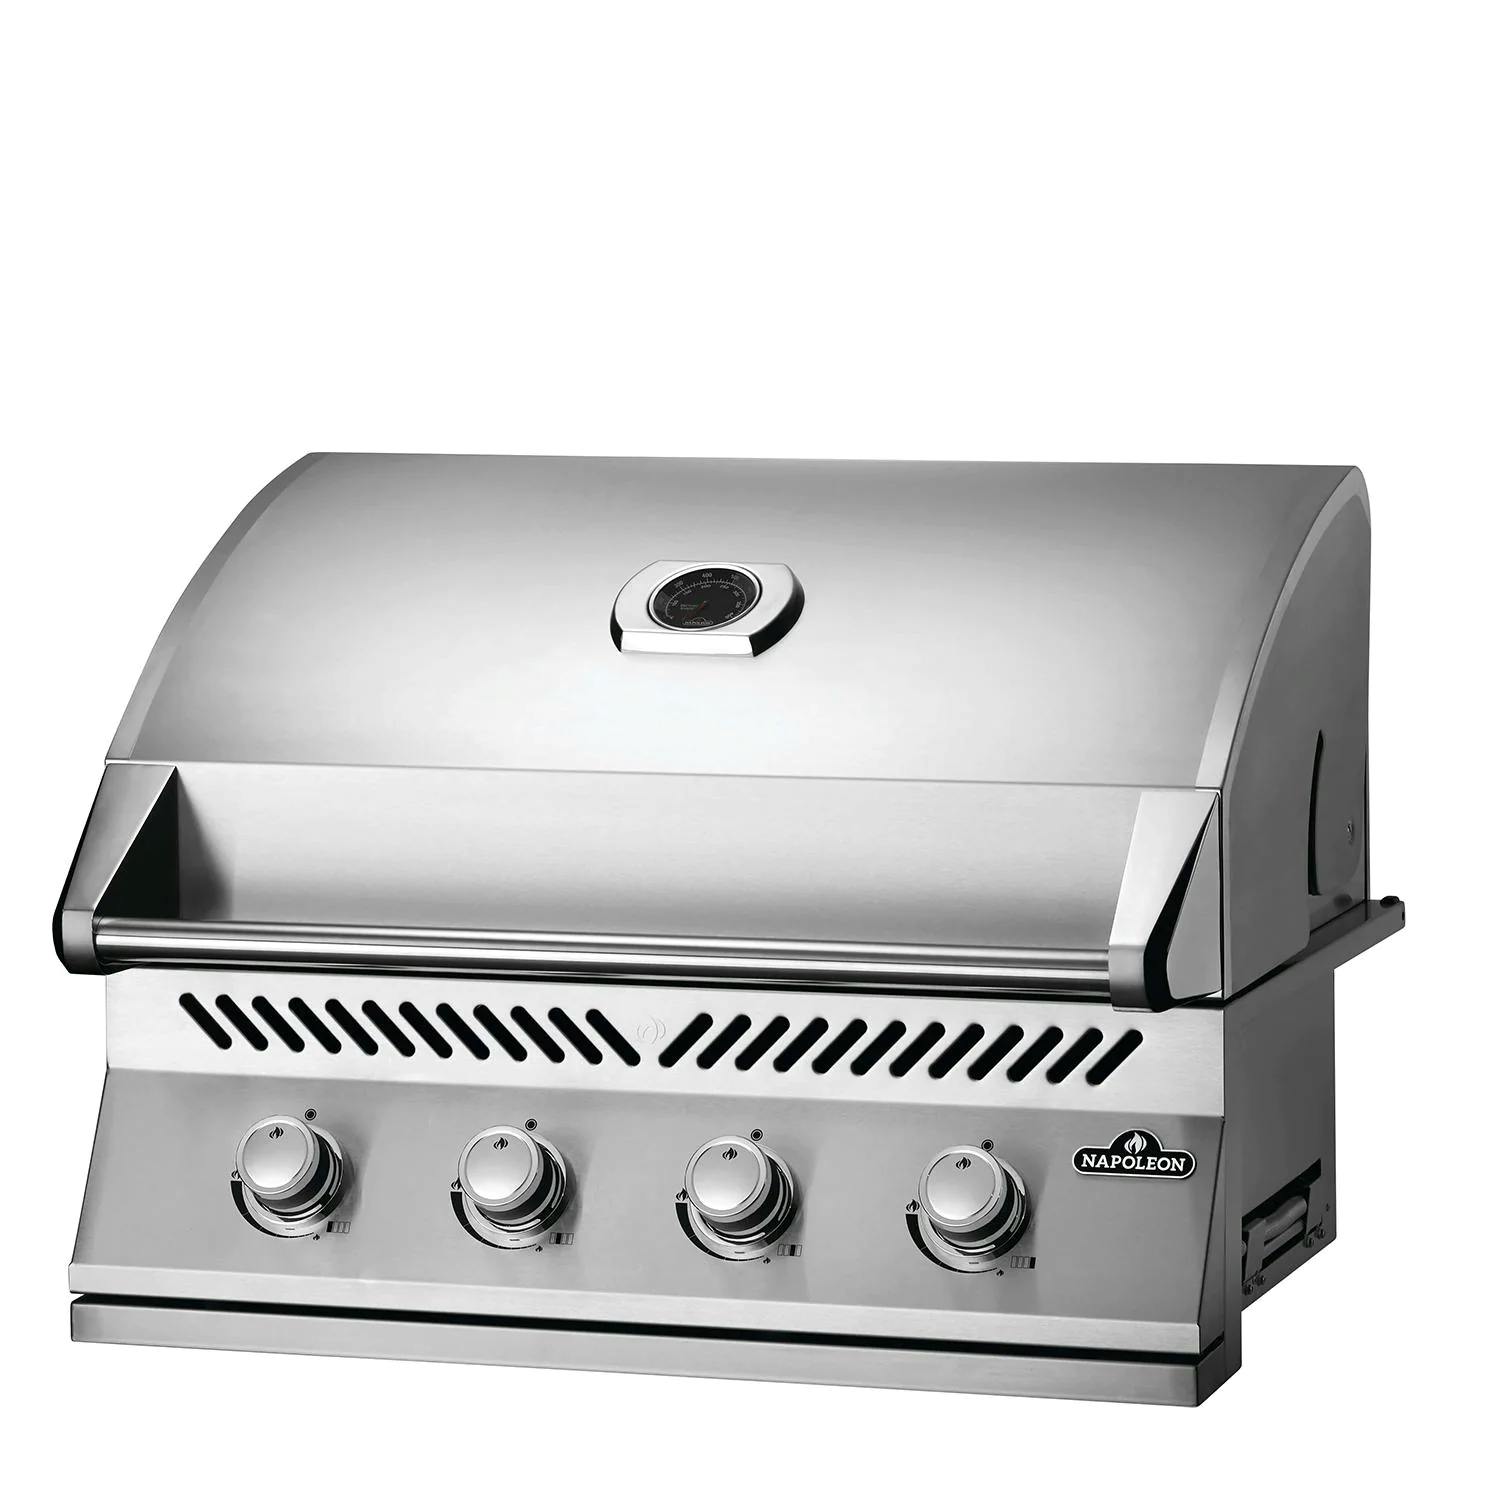 Napoleon 500 Series Built-in Gas Grill